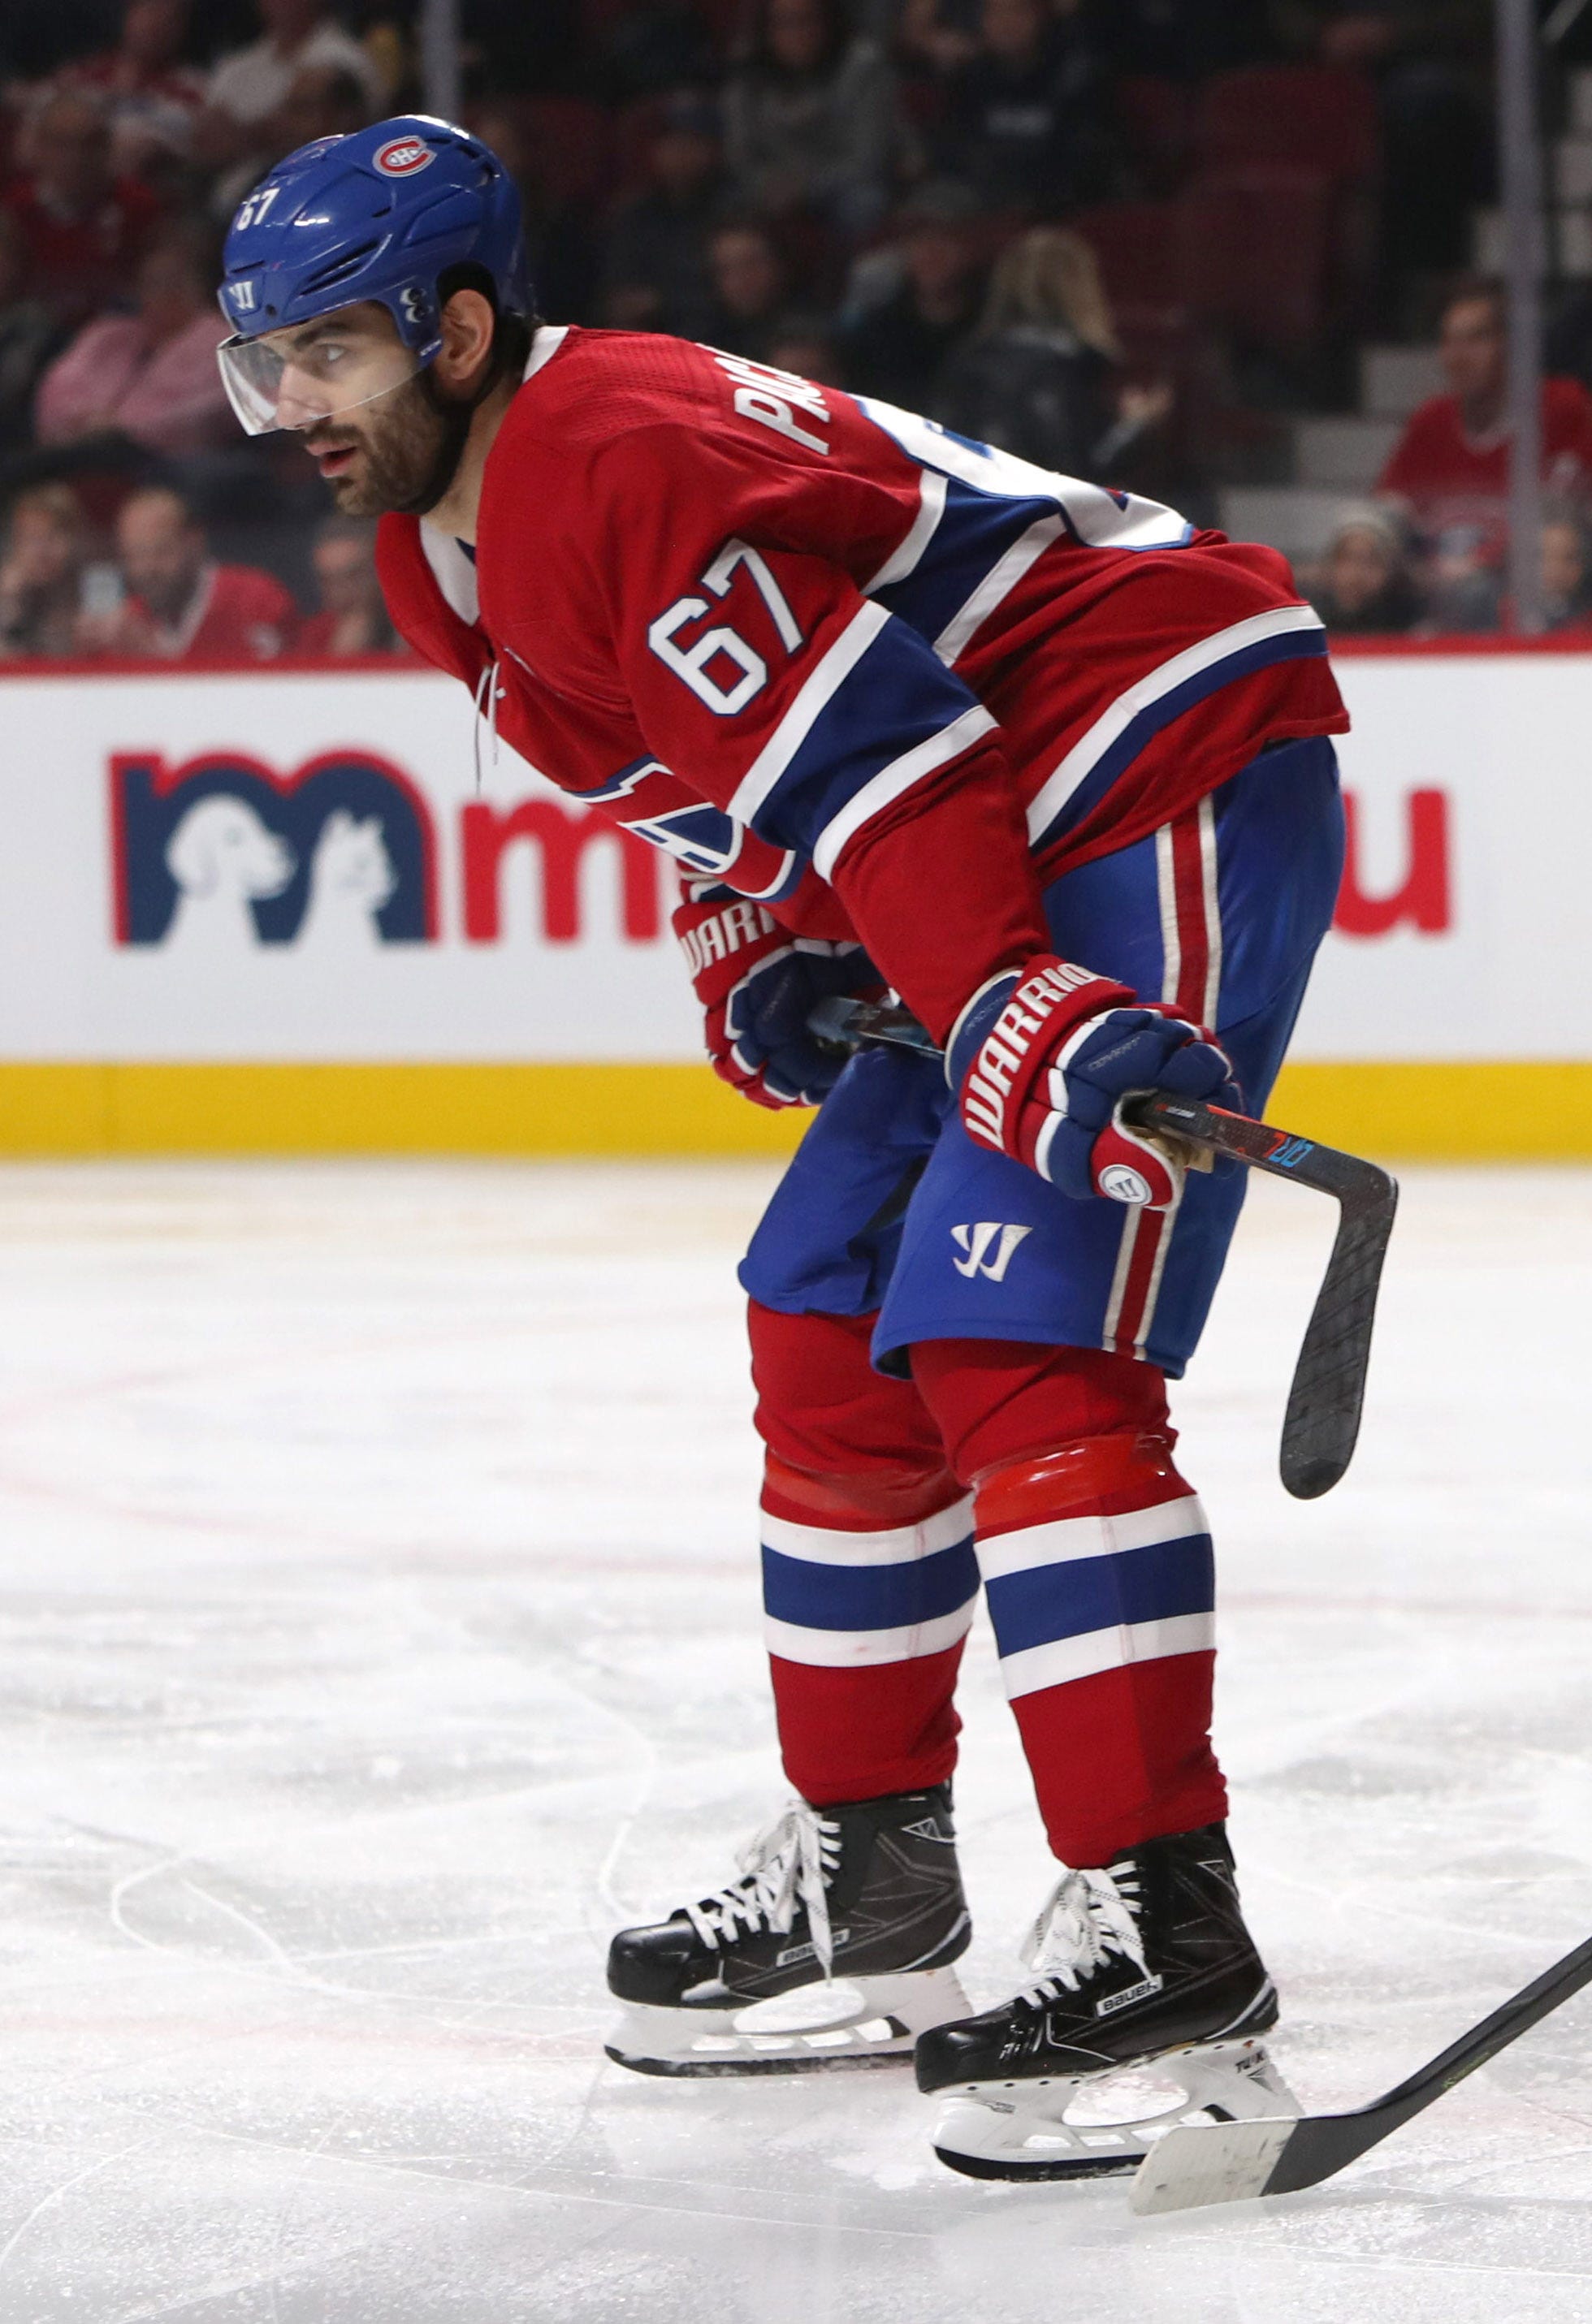 Canadiens' Max Pacioretty to miss several weeks with knee injury